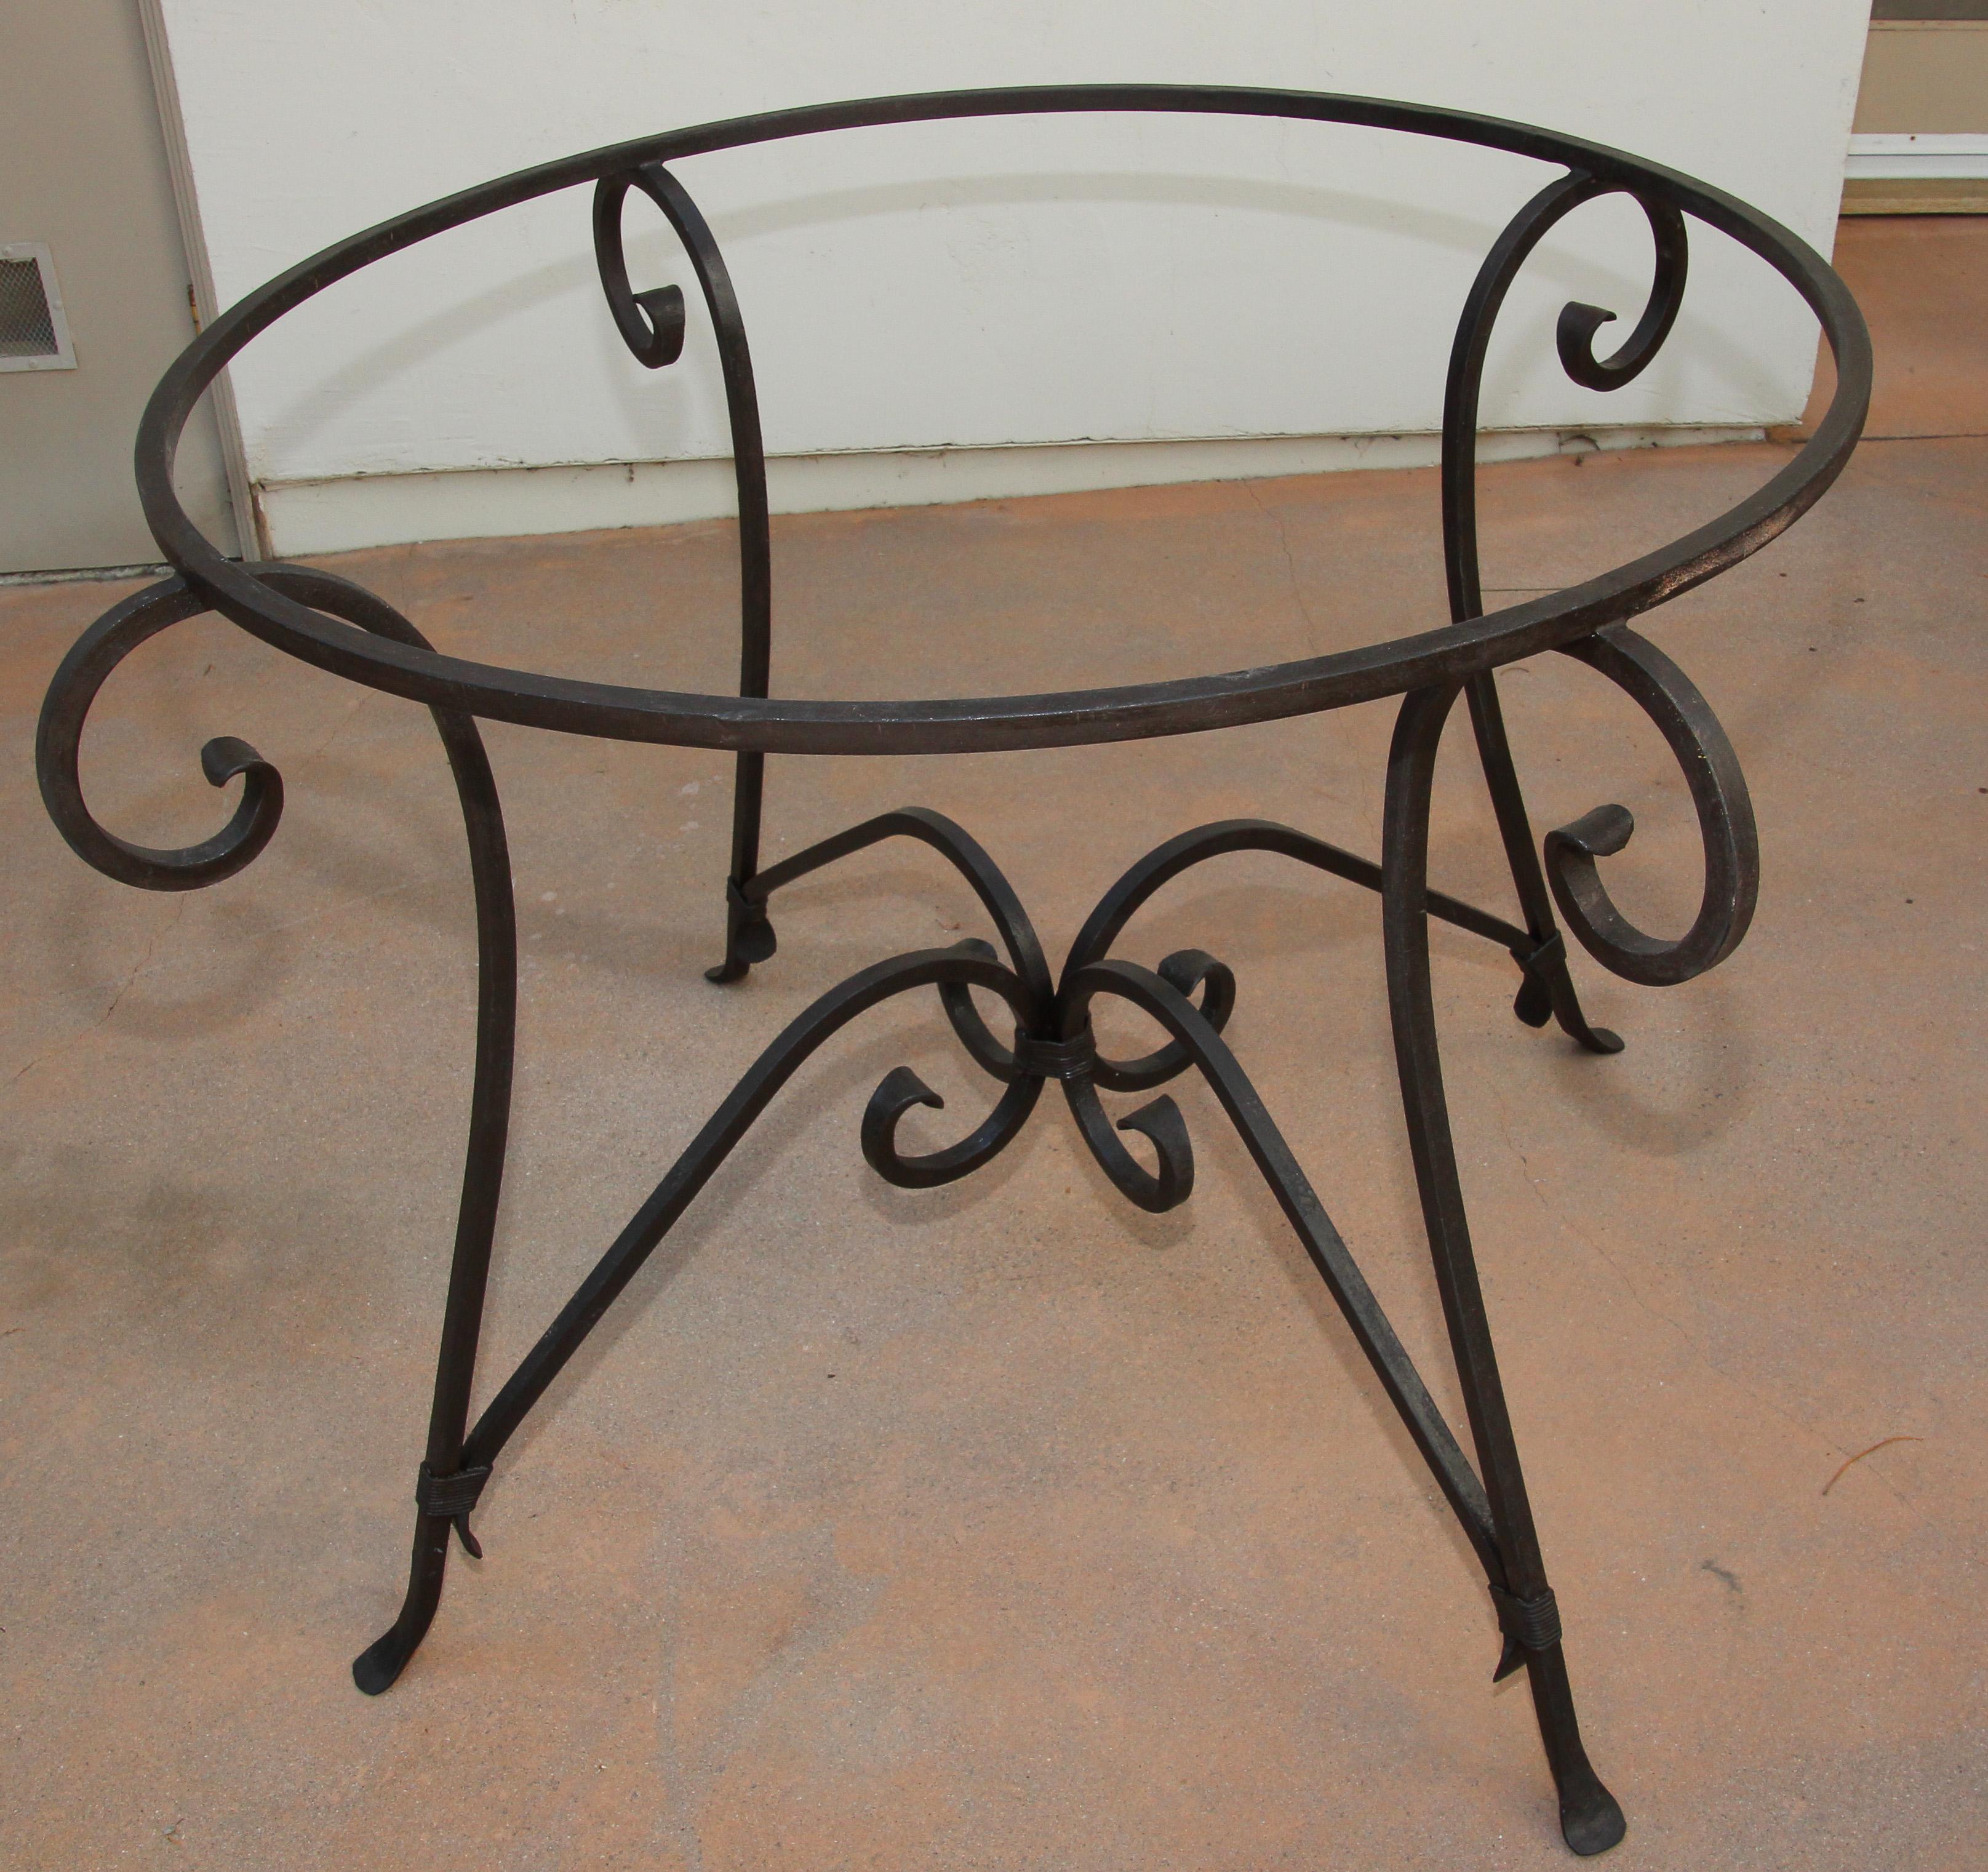 Hand forged Spanish iron base with curved legs, scrolls wrought iron dining table pedestal.
Could be use indoor or outdoor.
Vintage Spanish Moorish style wrought iron base.
Listing is for the base only and does not include a glass top, could be used